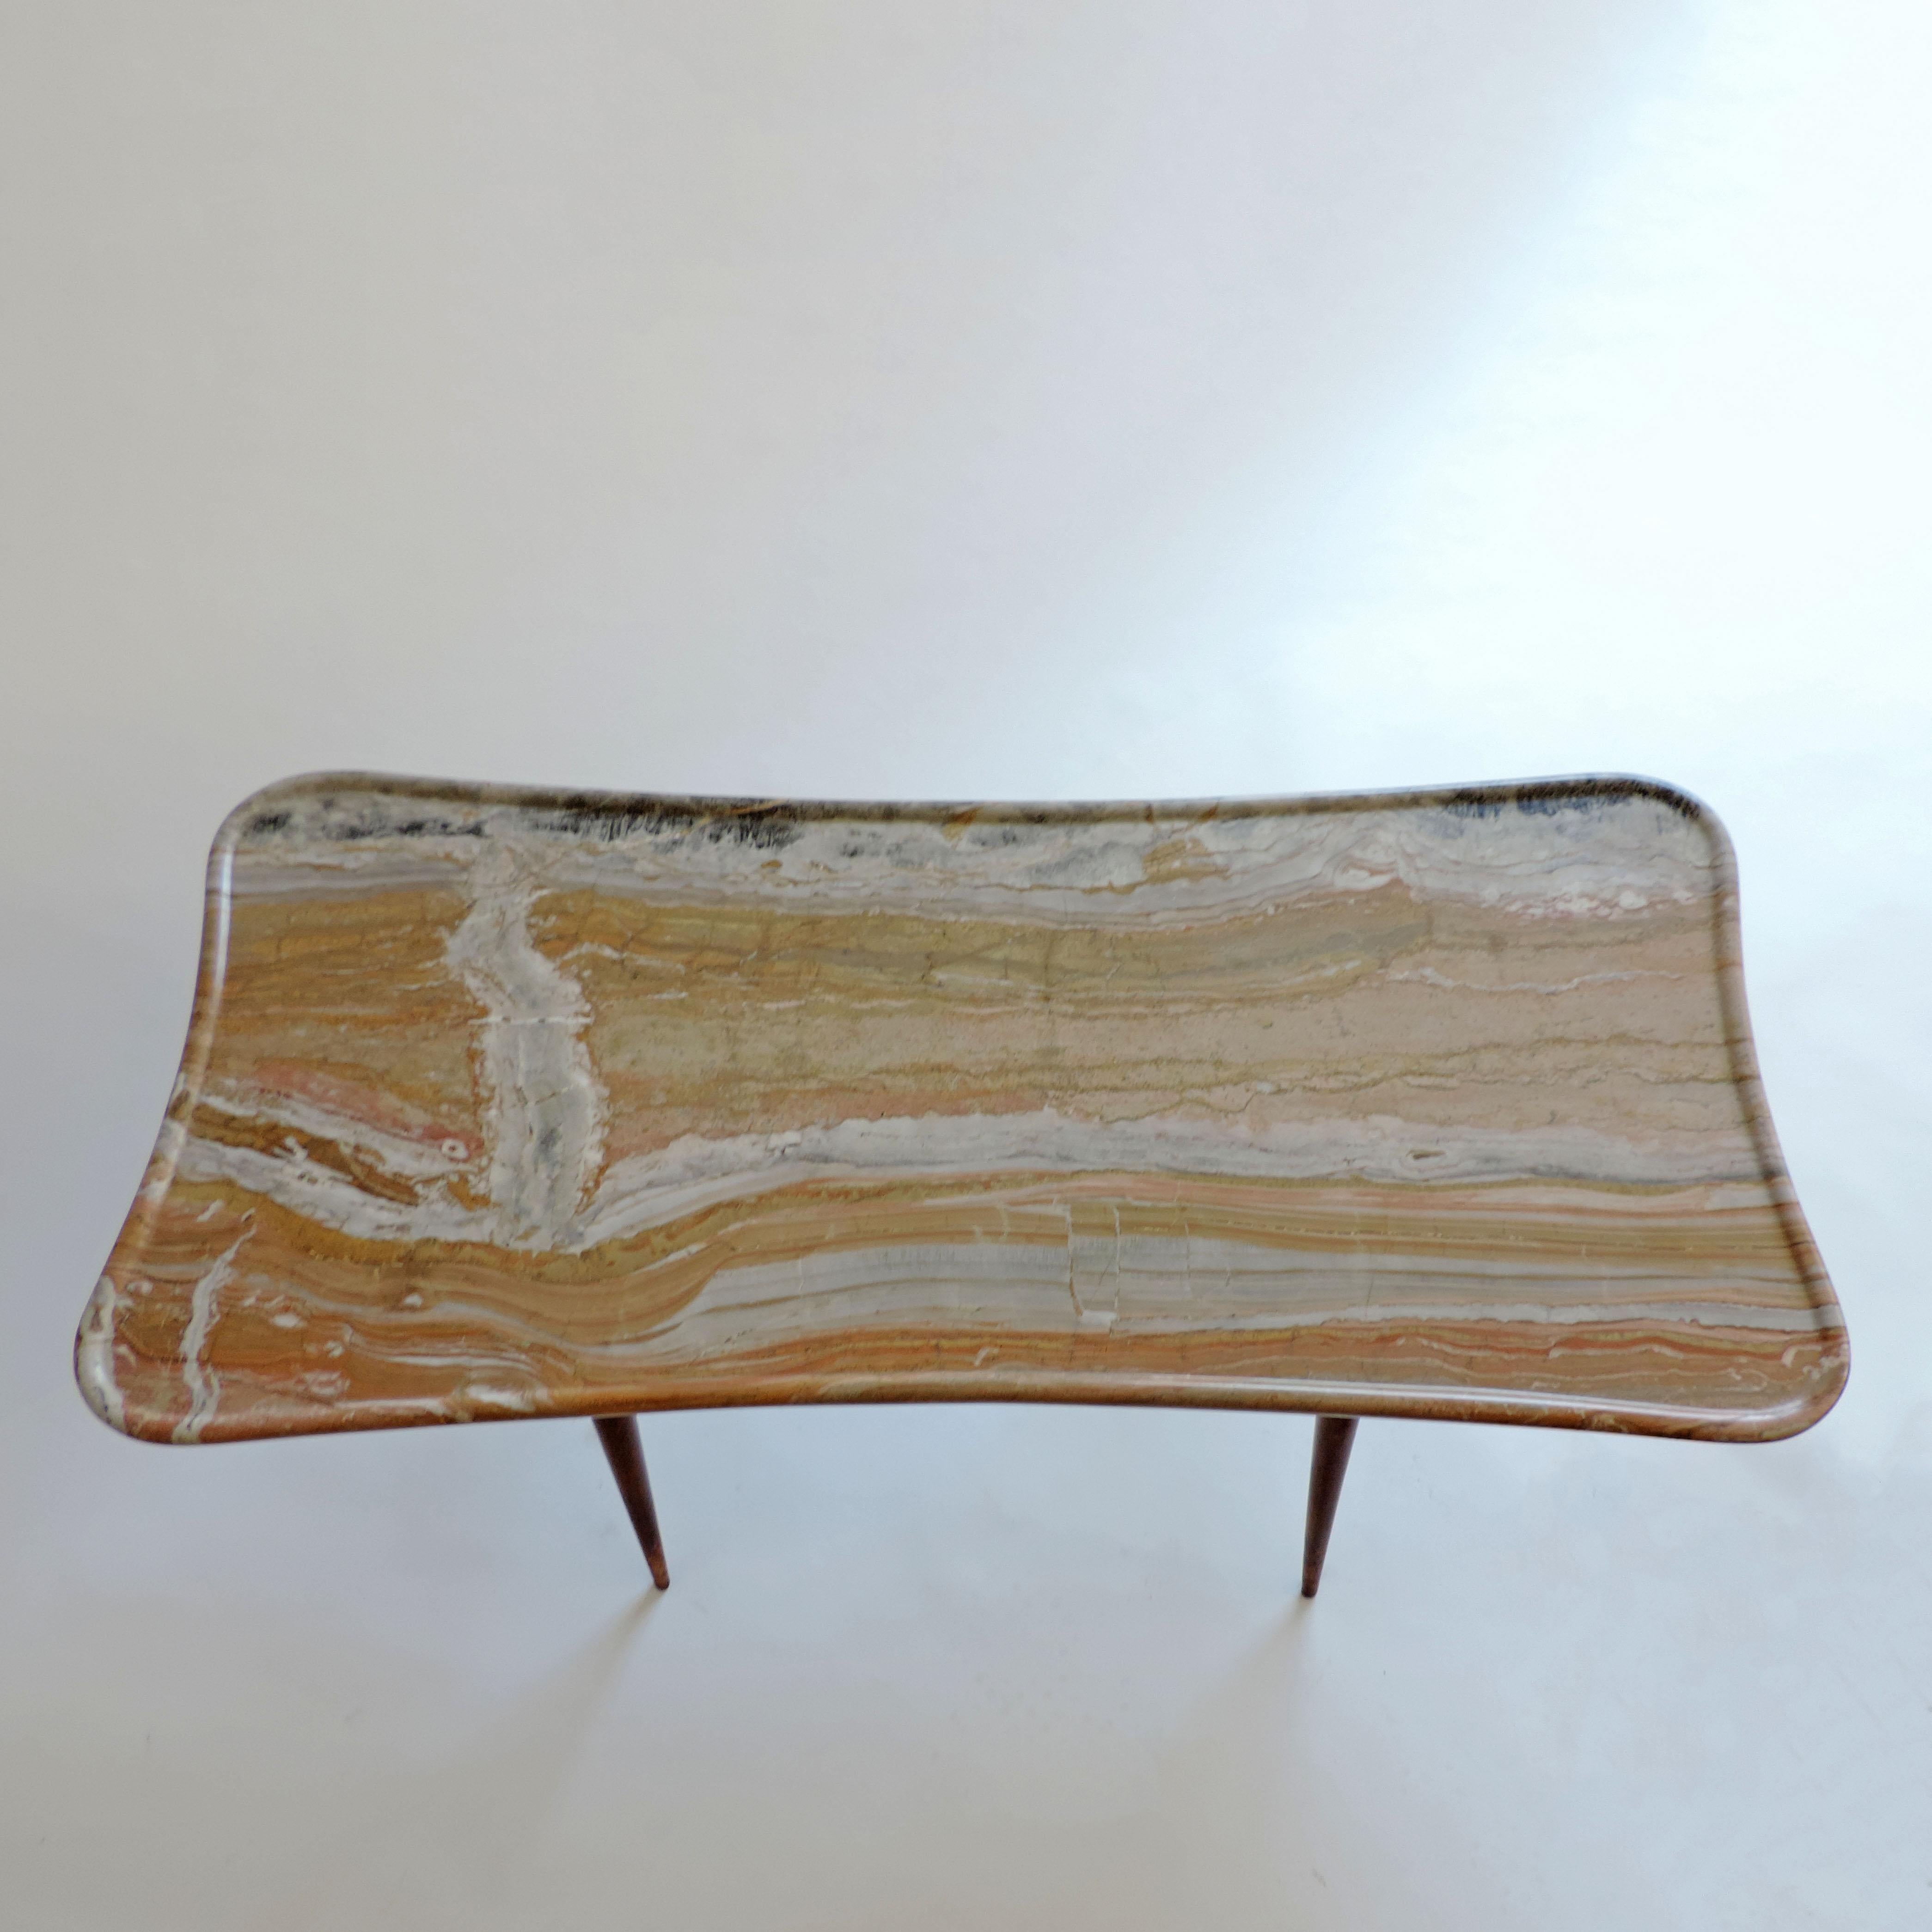 Rare Surrealist Fabrizio Clerici coffee table in wood and sculpted marble.
Italy 1940s.